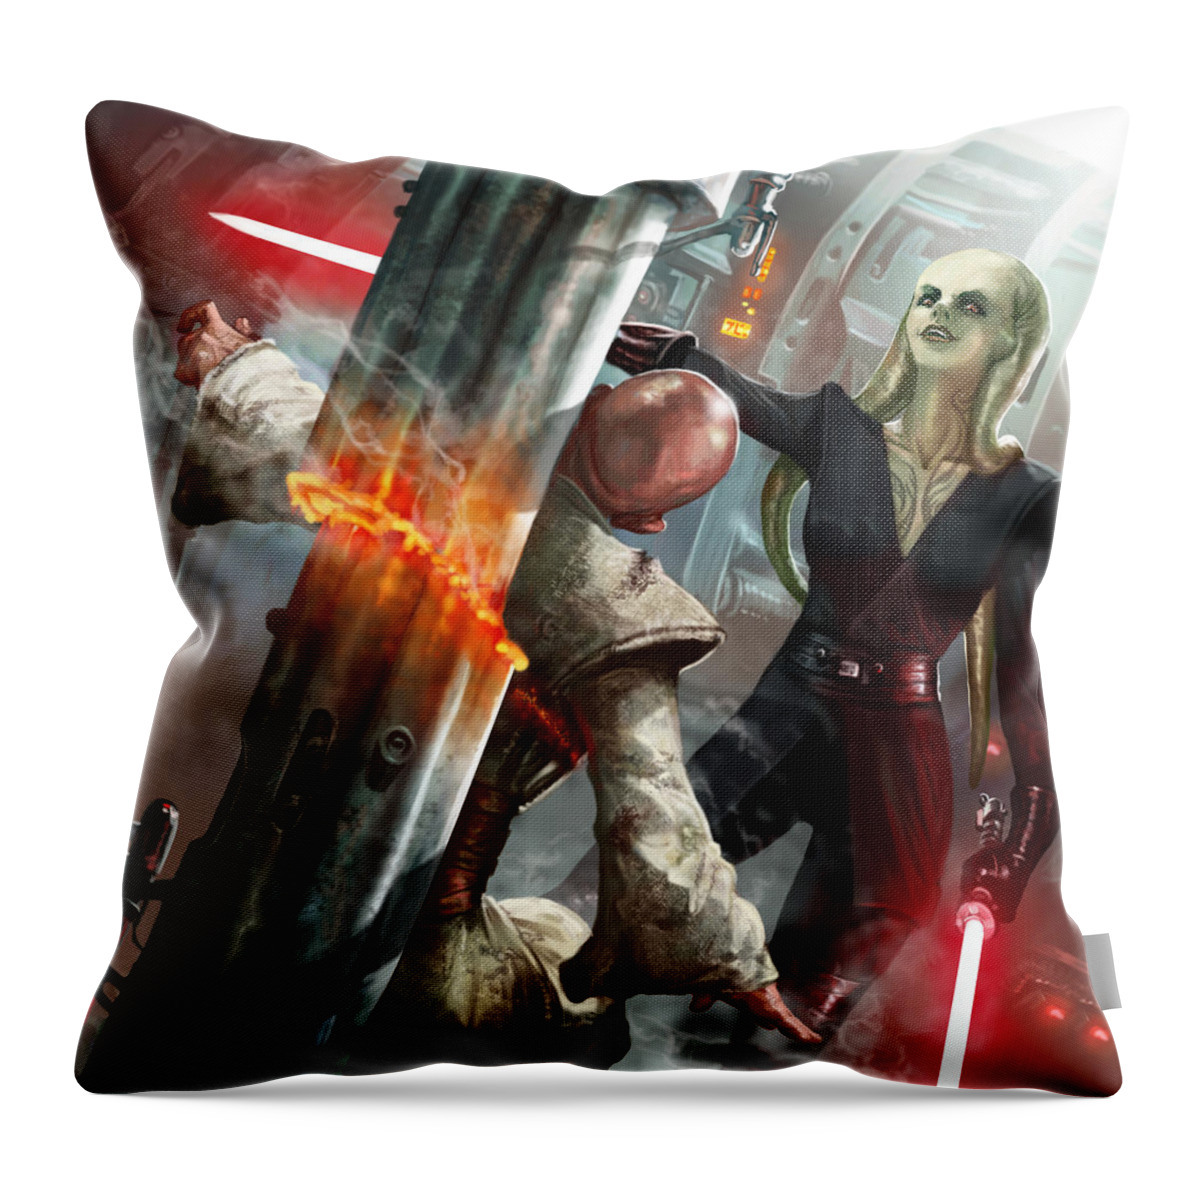 Chewbacca - Star Wars the Card Game Throw Pillow by Ryan Barger - Fine Art  America